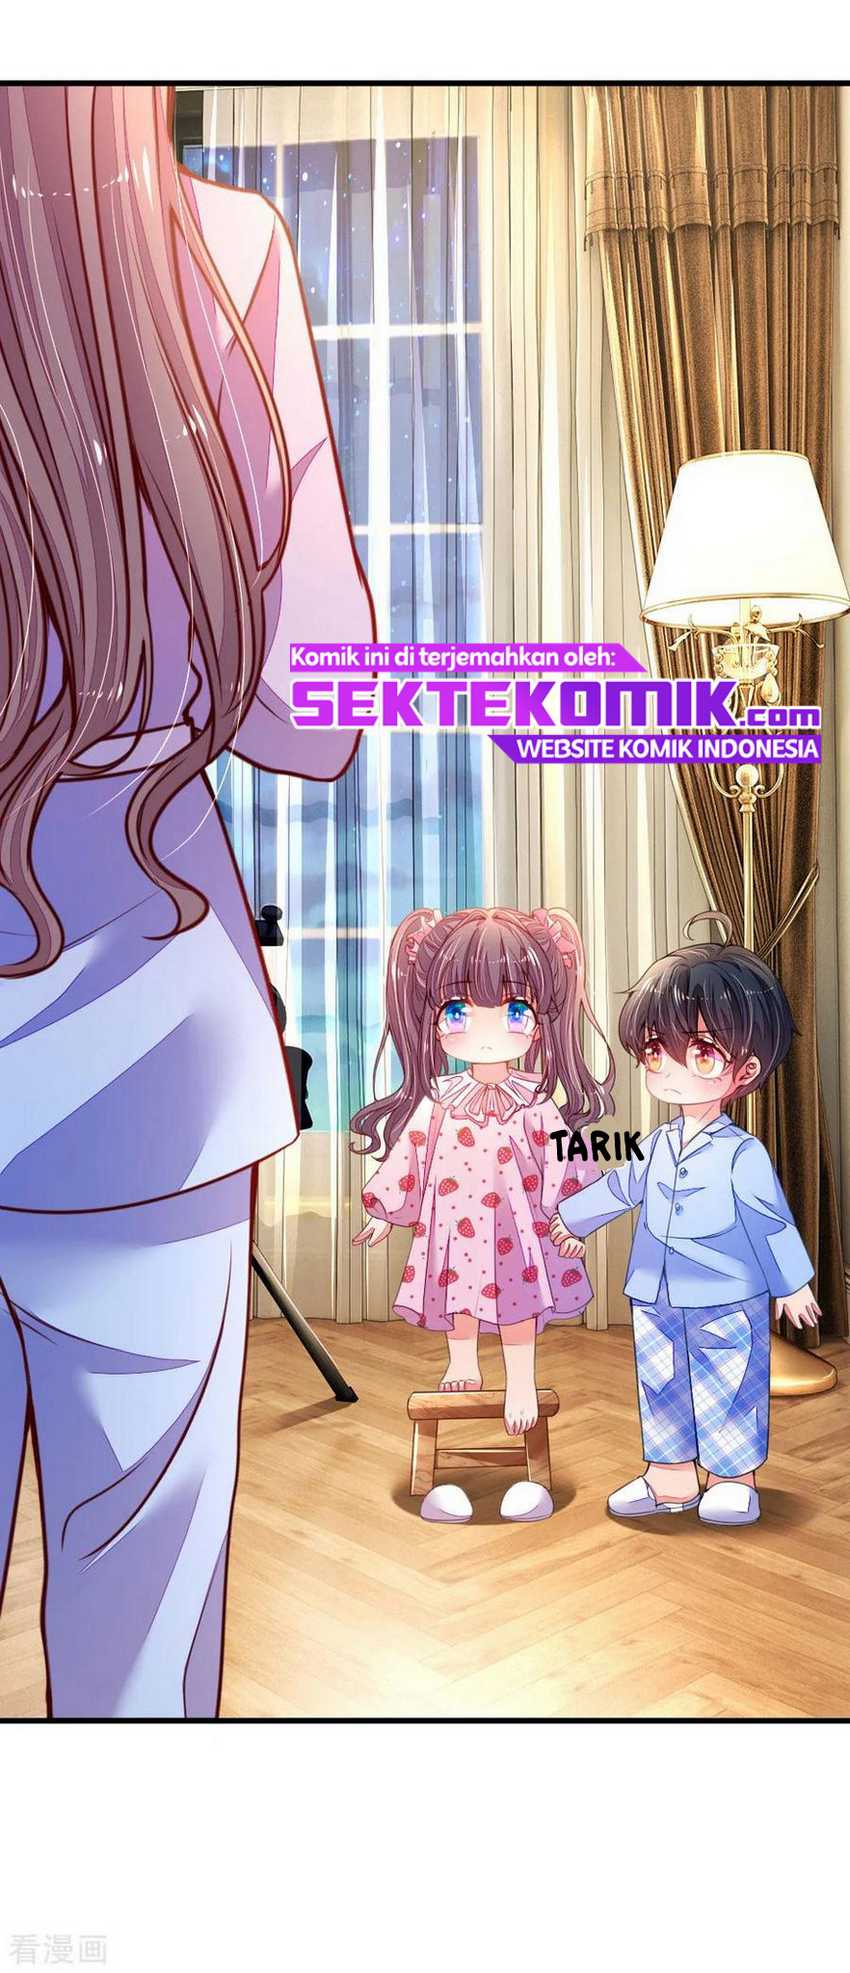 Mommy strikes: Daddy, Please Take the Move Chapter 28